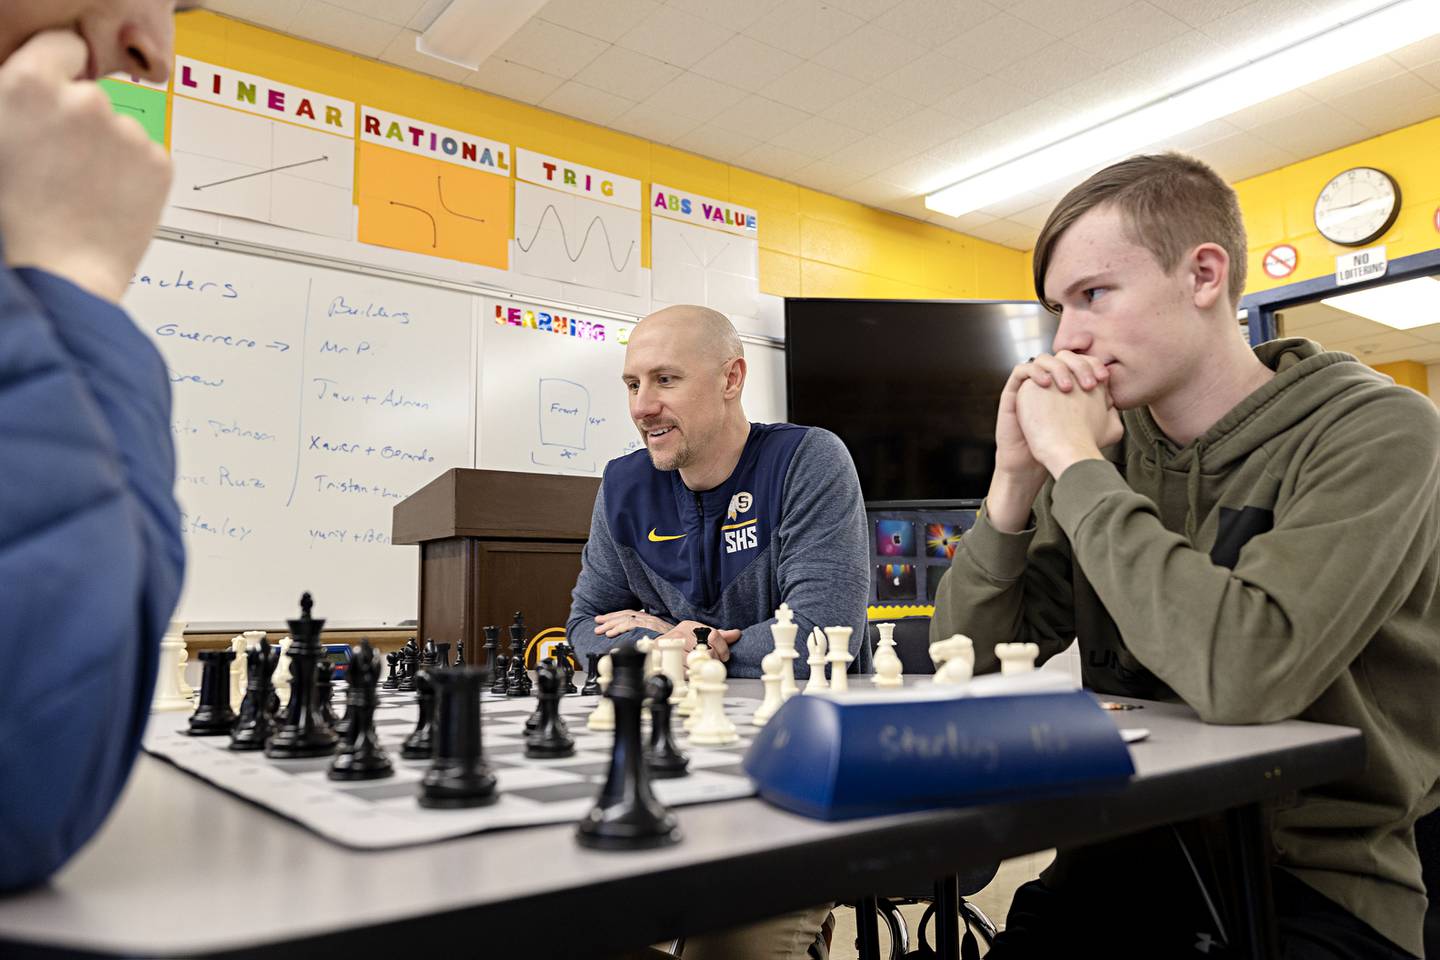 Sterling High School chess instructor Joel Penne plays a team chess game with some of his students during an off season activity hour at the school.